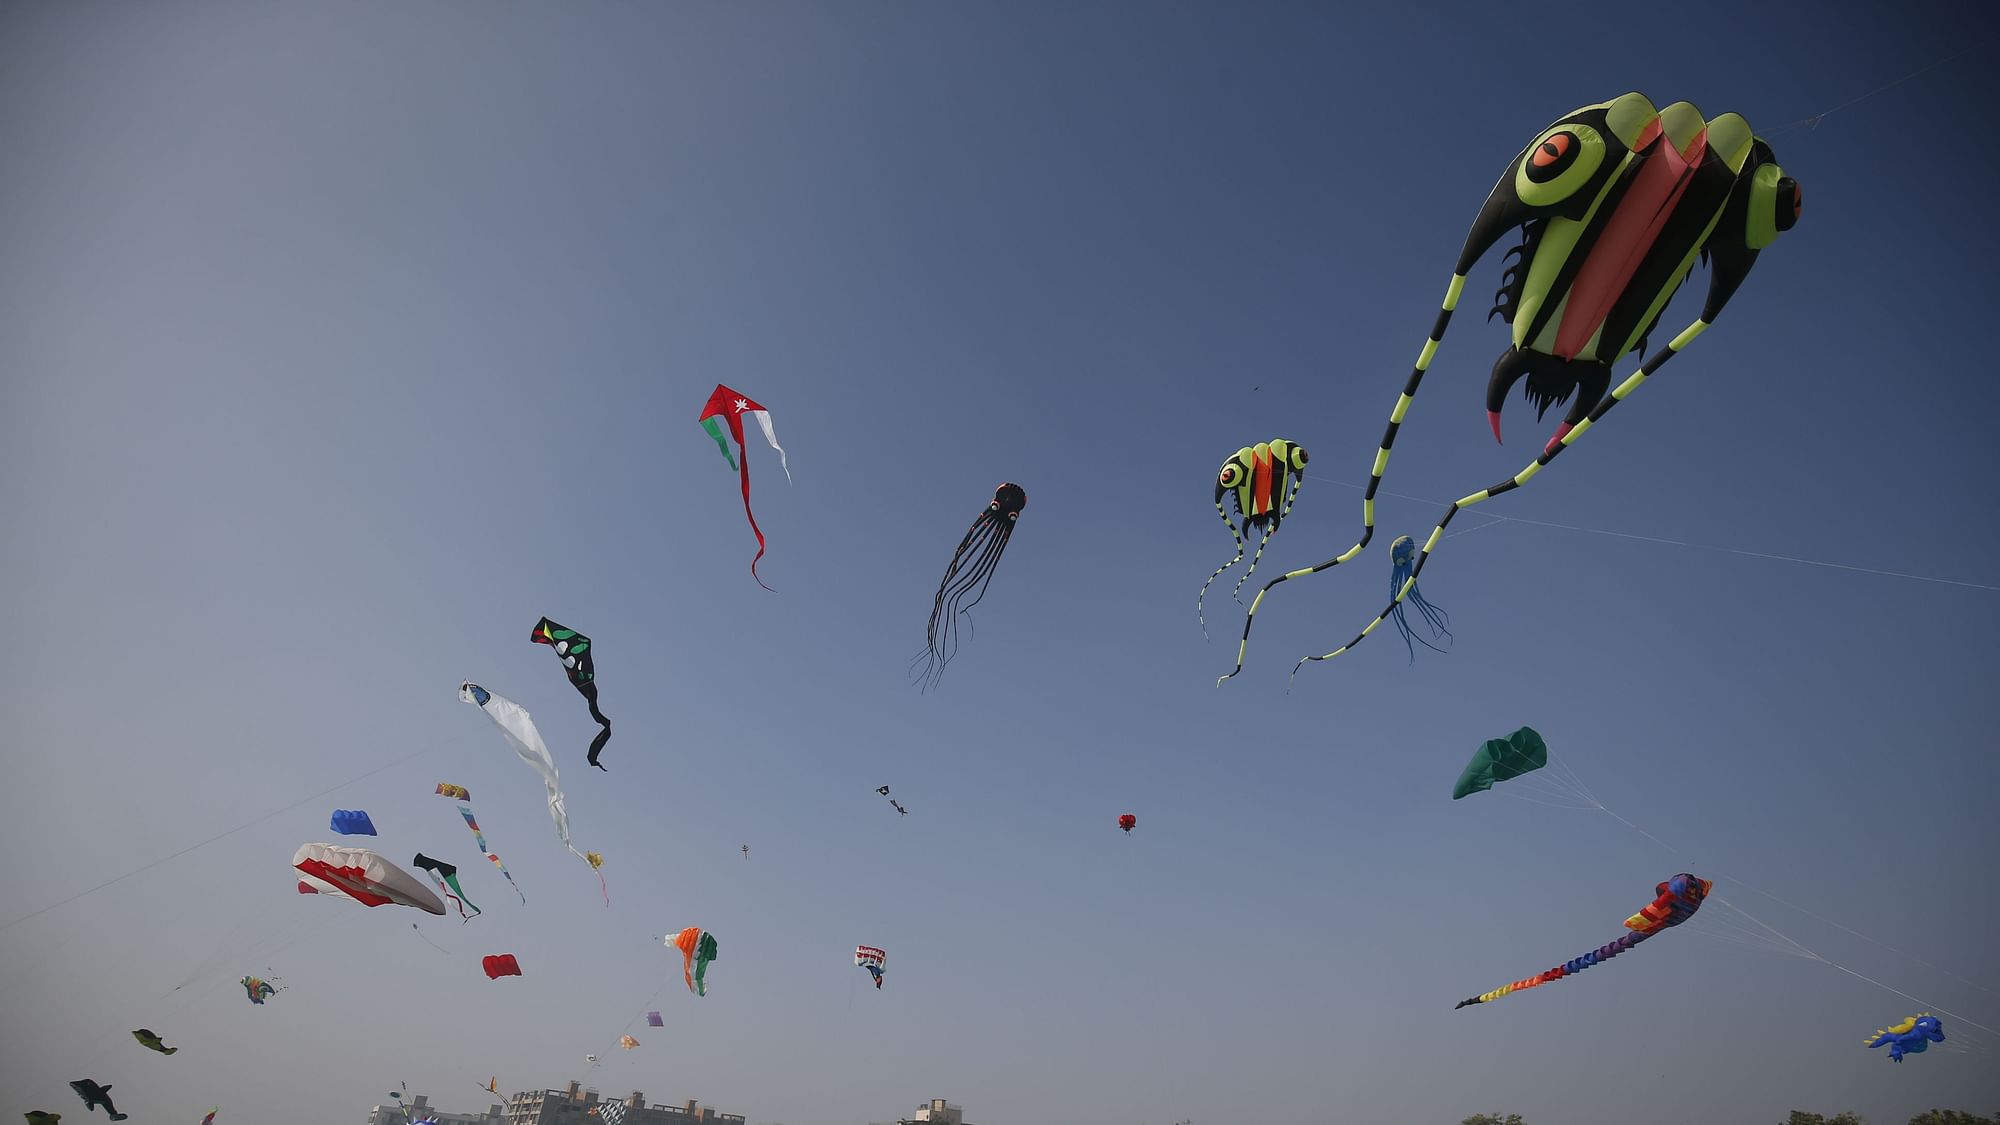 Colourful kites can be seen in the sky at the Sabarmati Riverfront in Ahmedabad